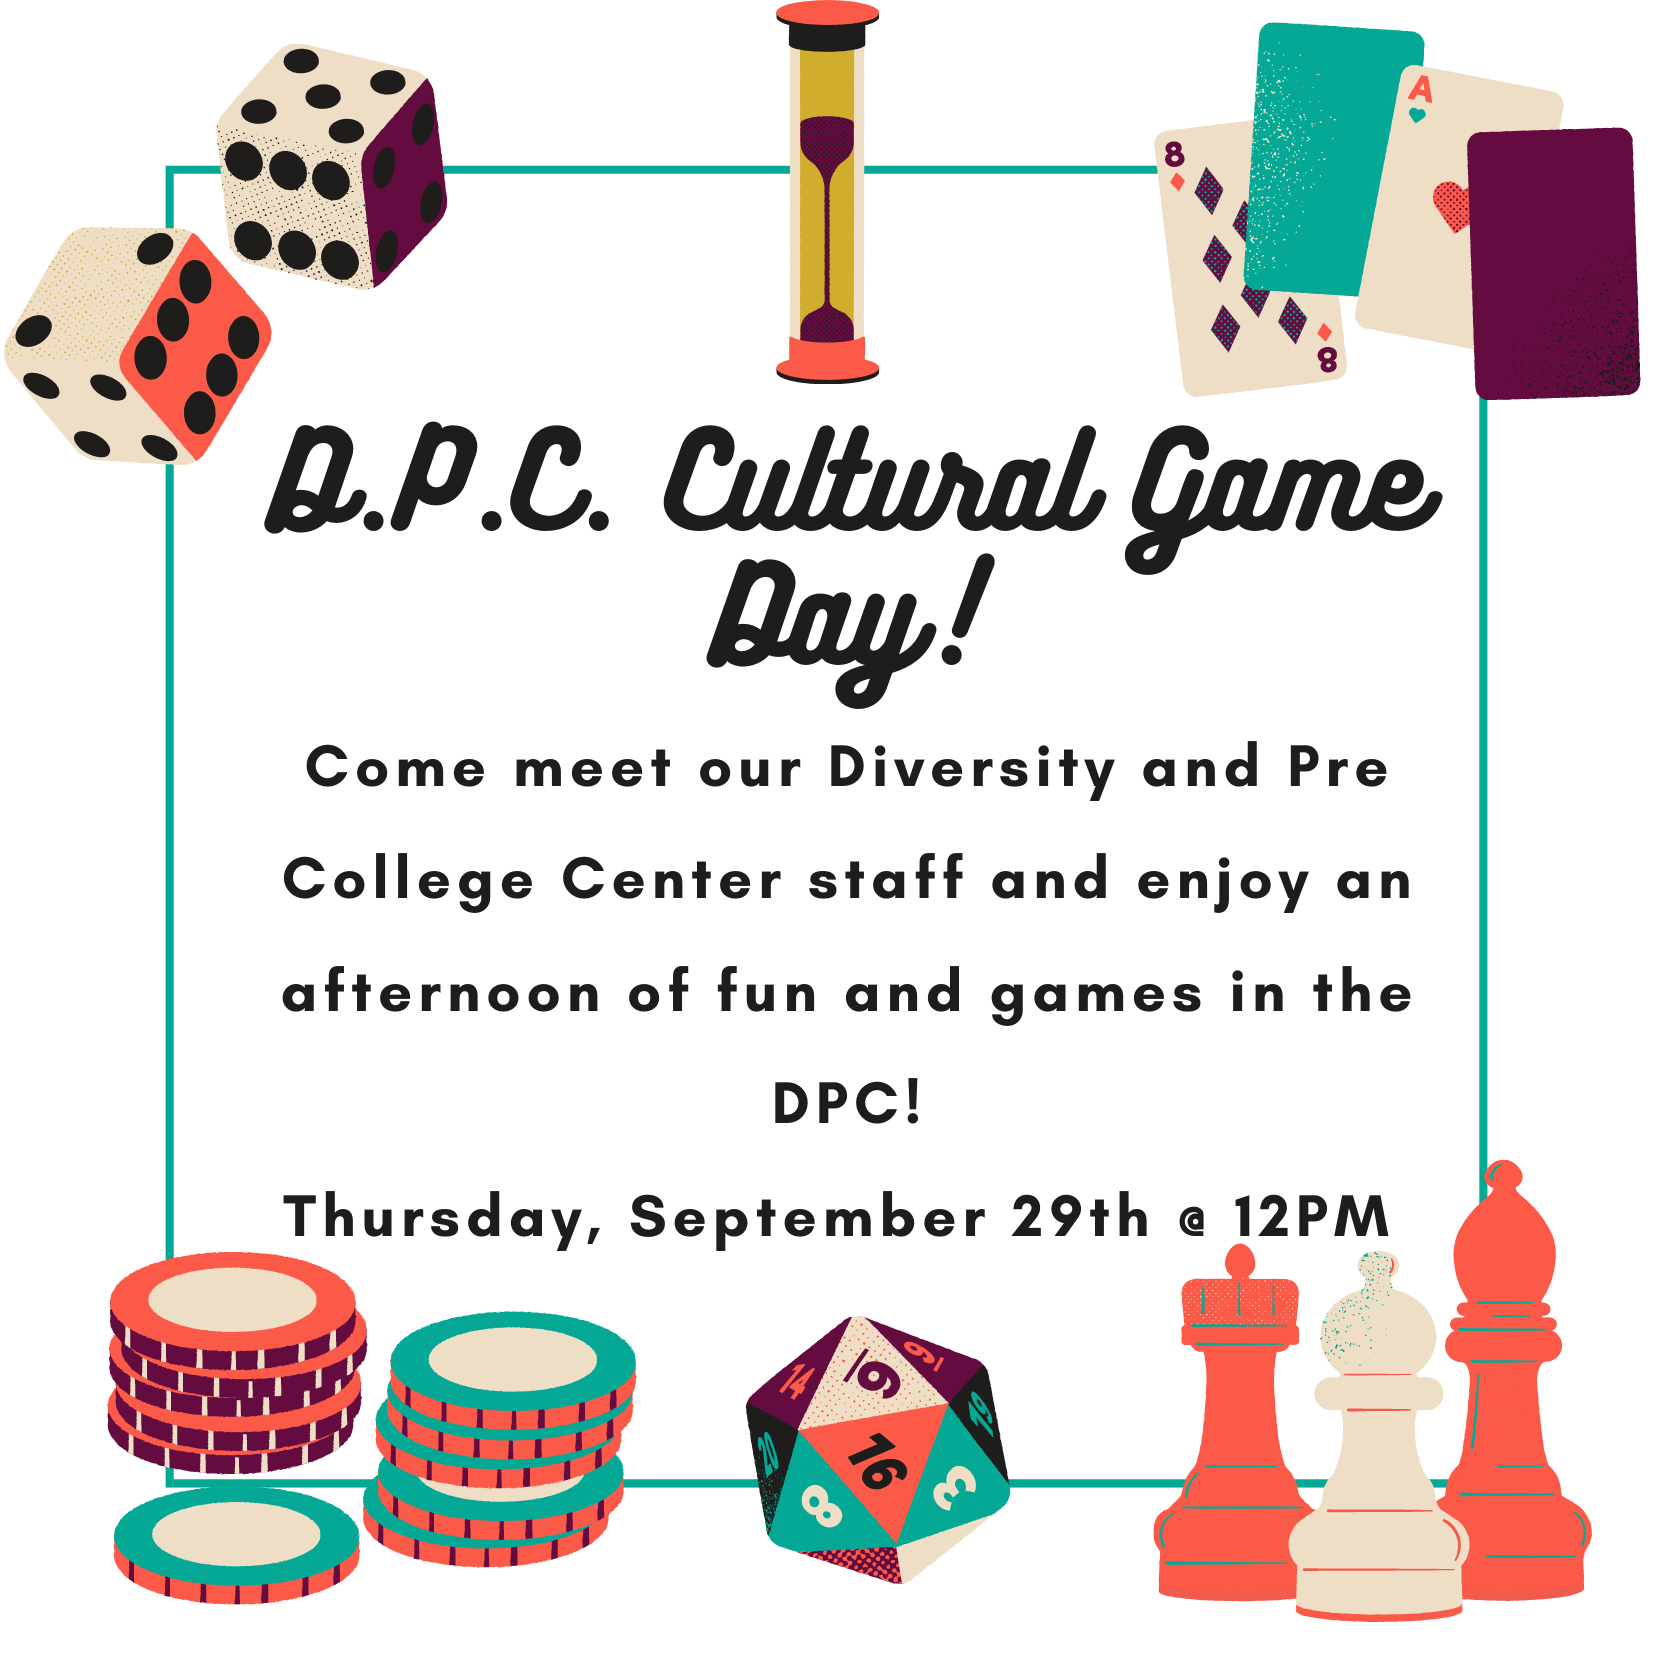 Details For Event 22509 – Cultural Game Day